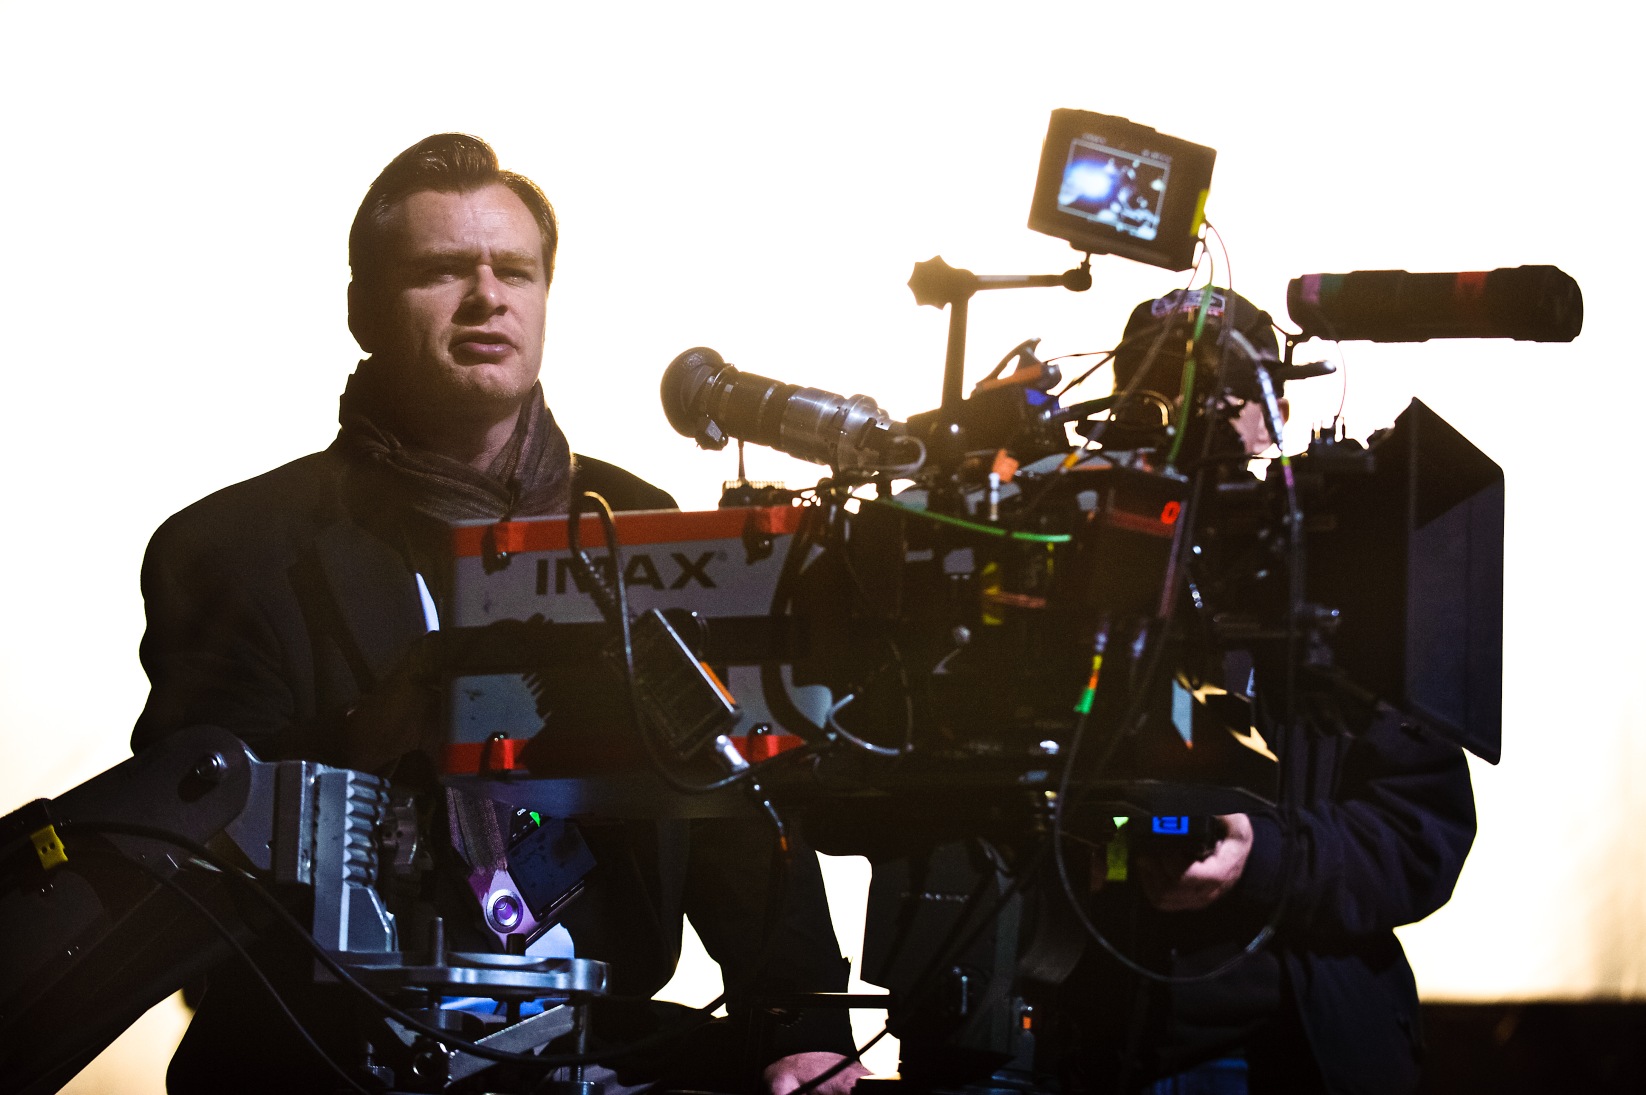 Director CHRIS NOLAN during the filming of Warner Bros. Pictures' and Legendary Pictures' action thriller "THE DARK KNIGHT RISES", a Warner Bros. Pictures release.  TM and © DC Comics